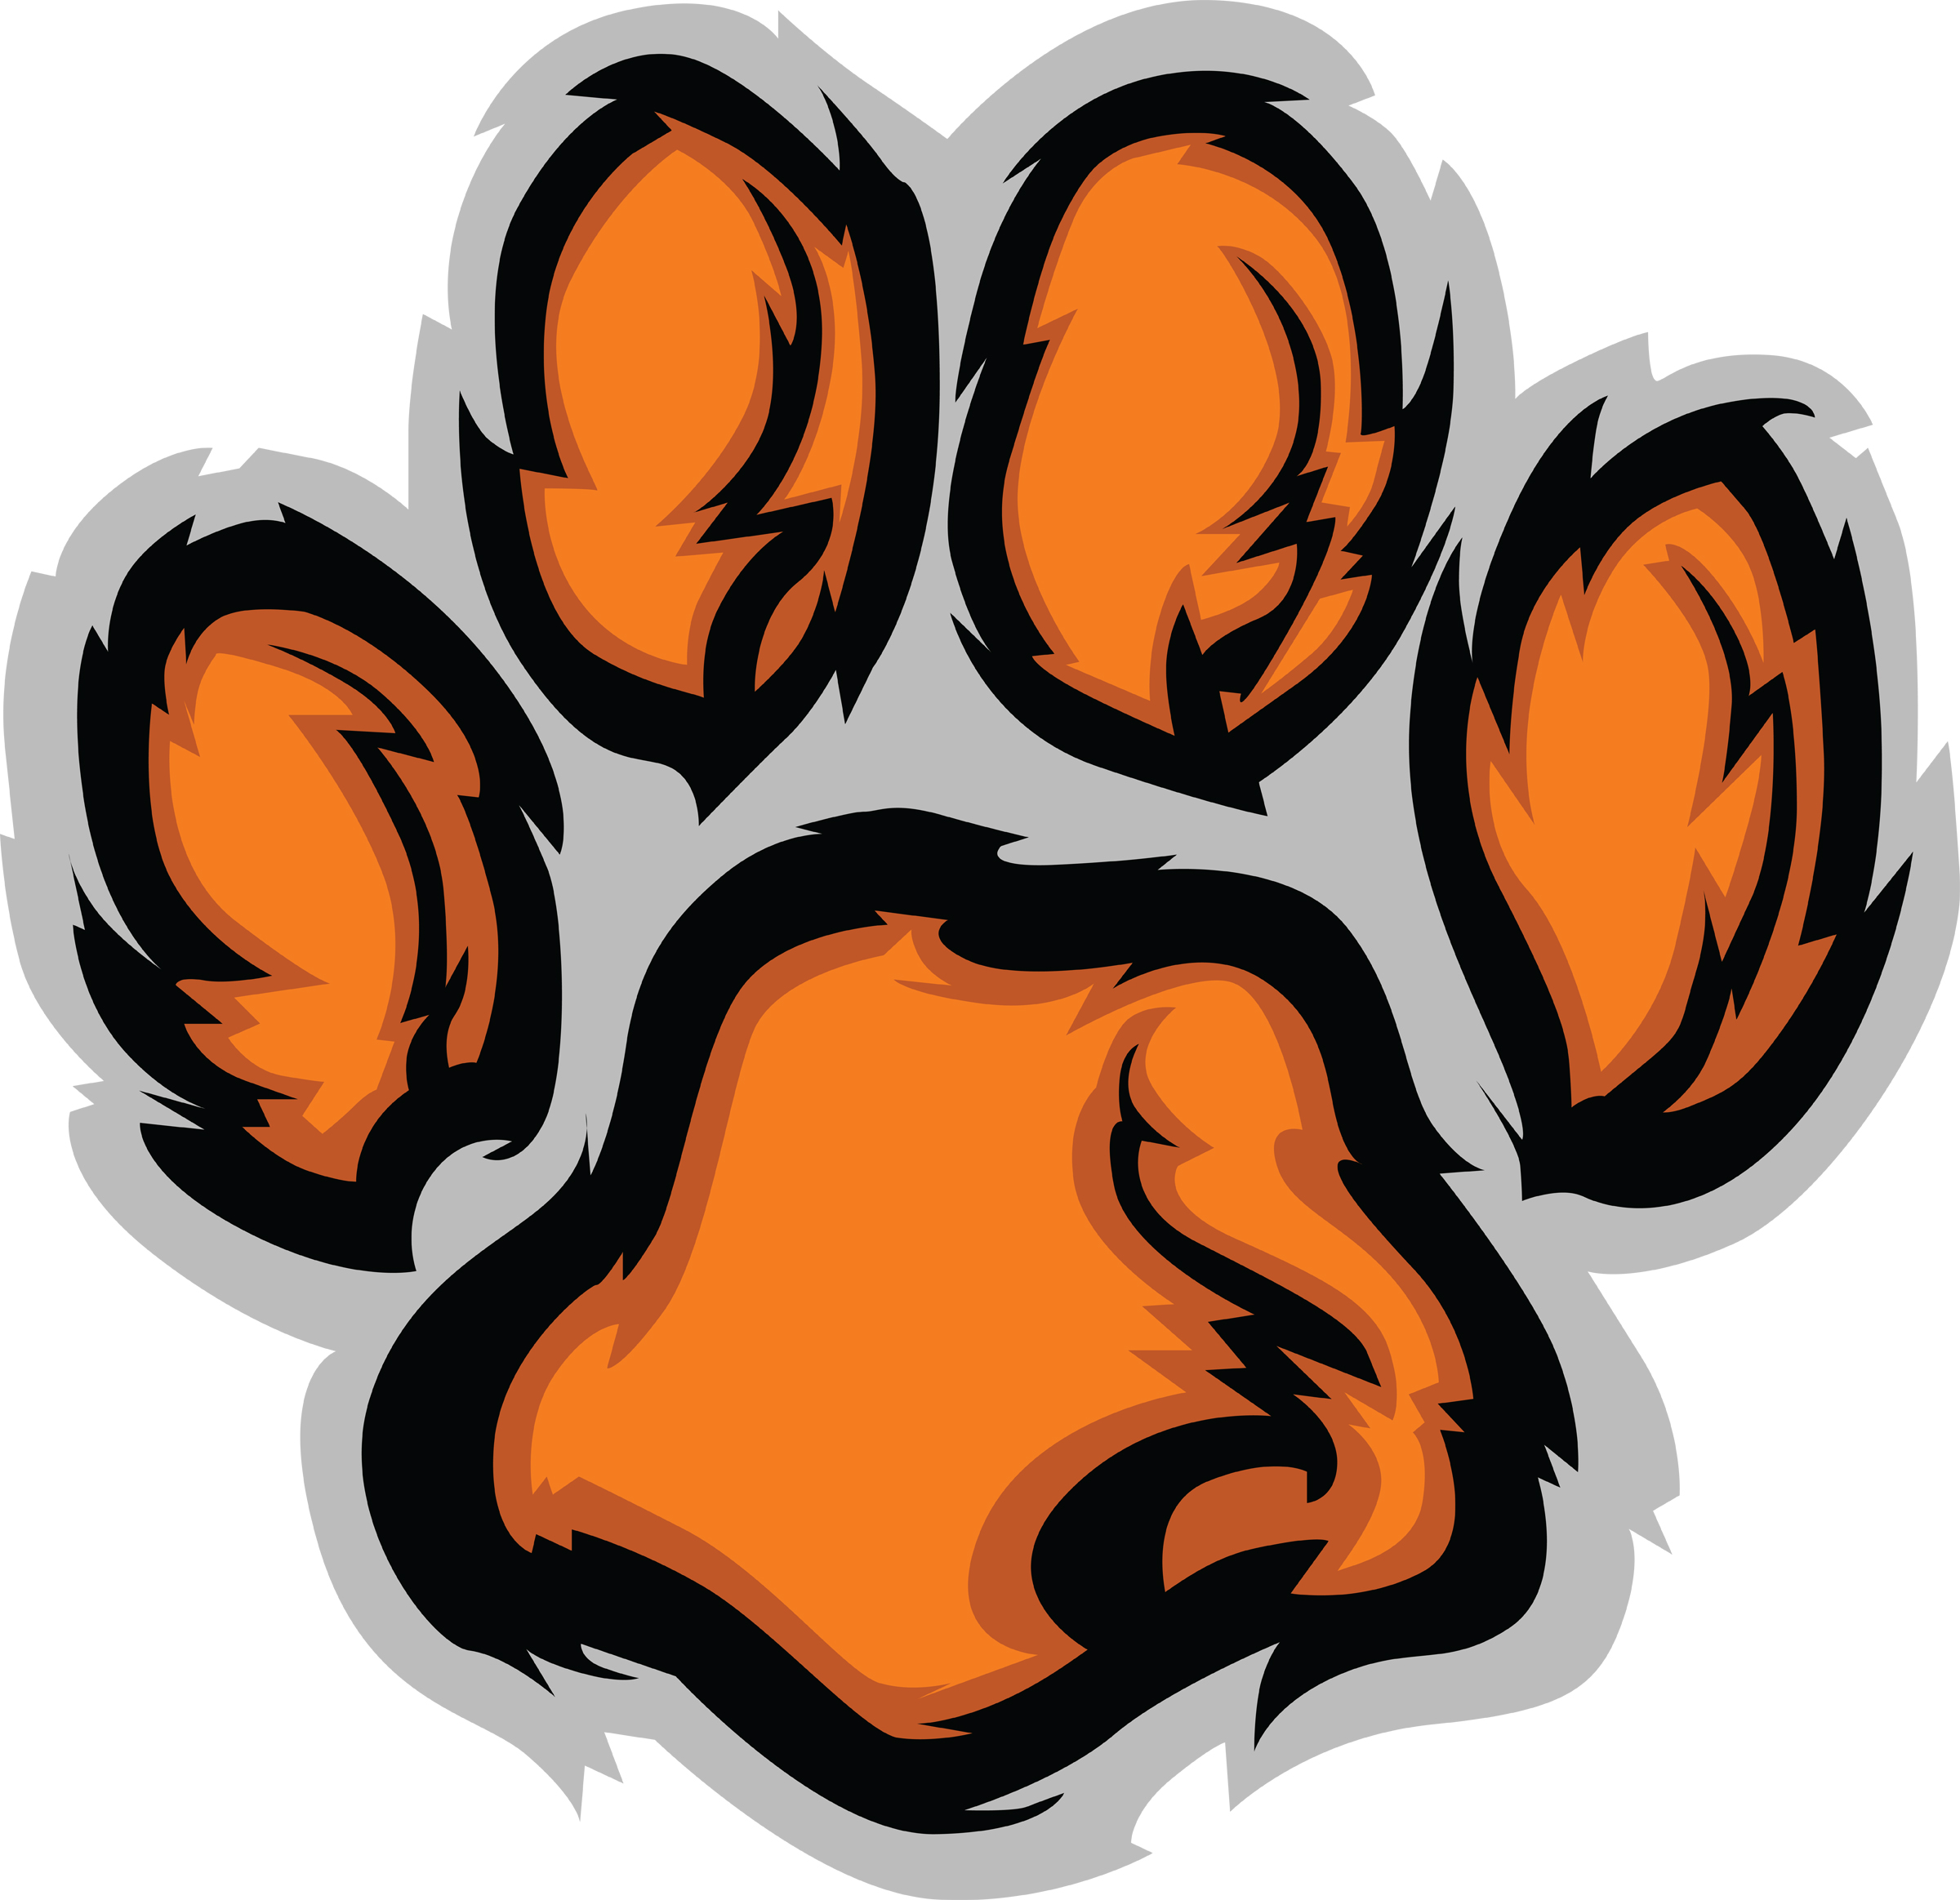 Tiger Paw image - vector clip art online, royalty free & public domain